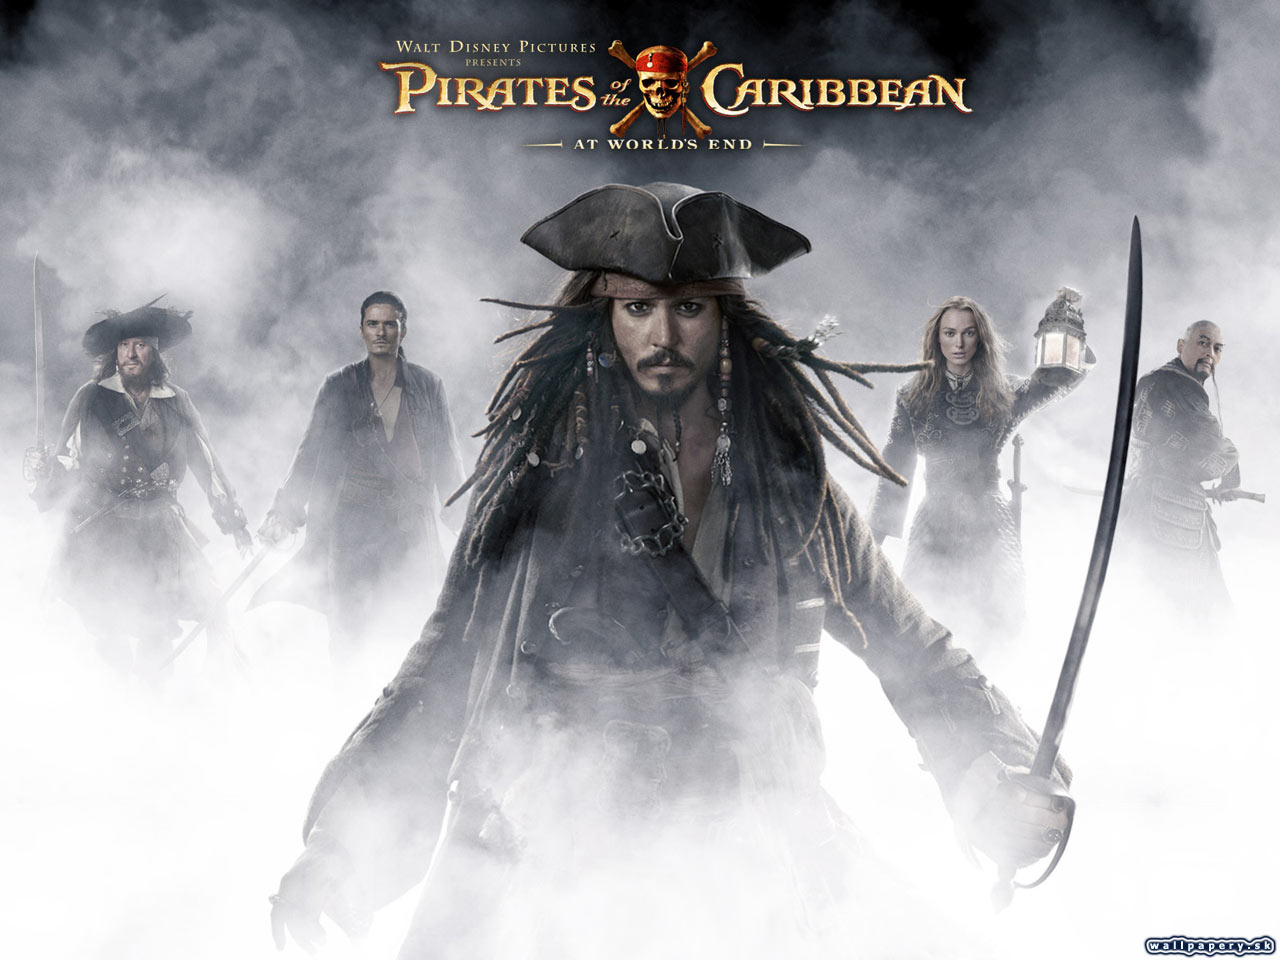 Pirates of the Caribbean: At World's End - wallpaper 1